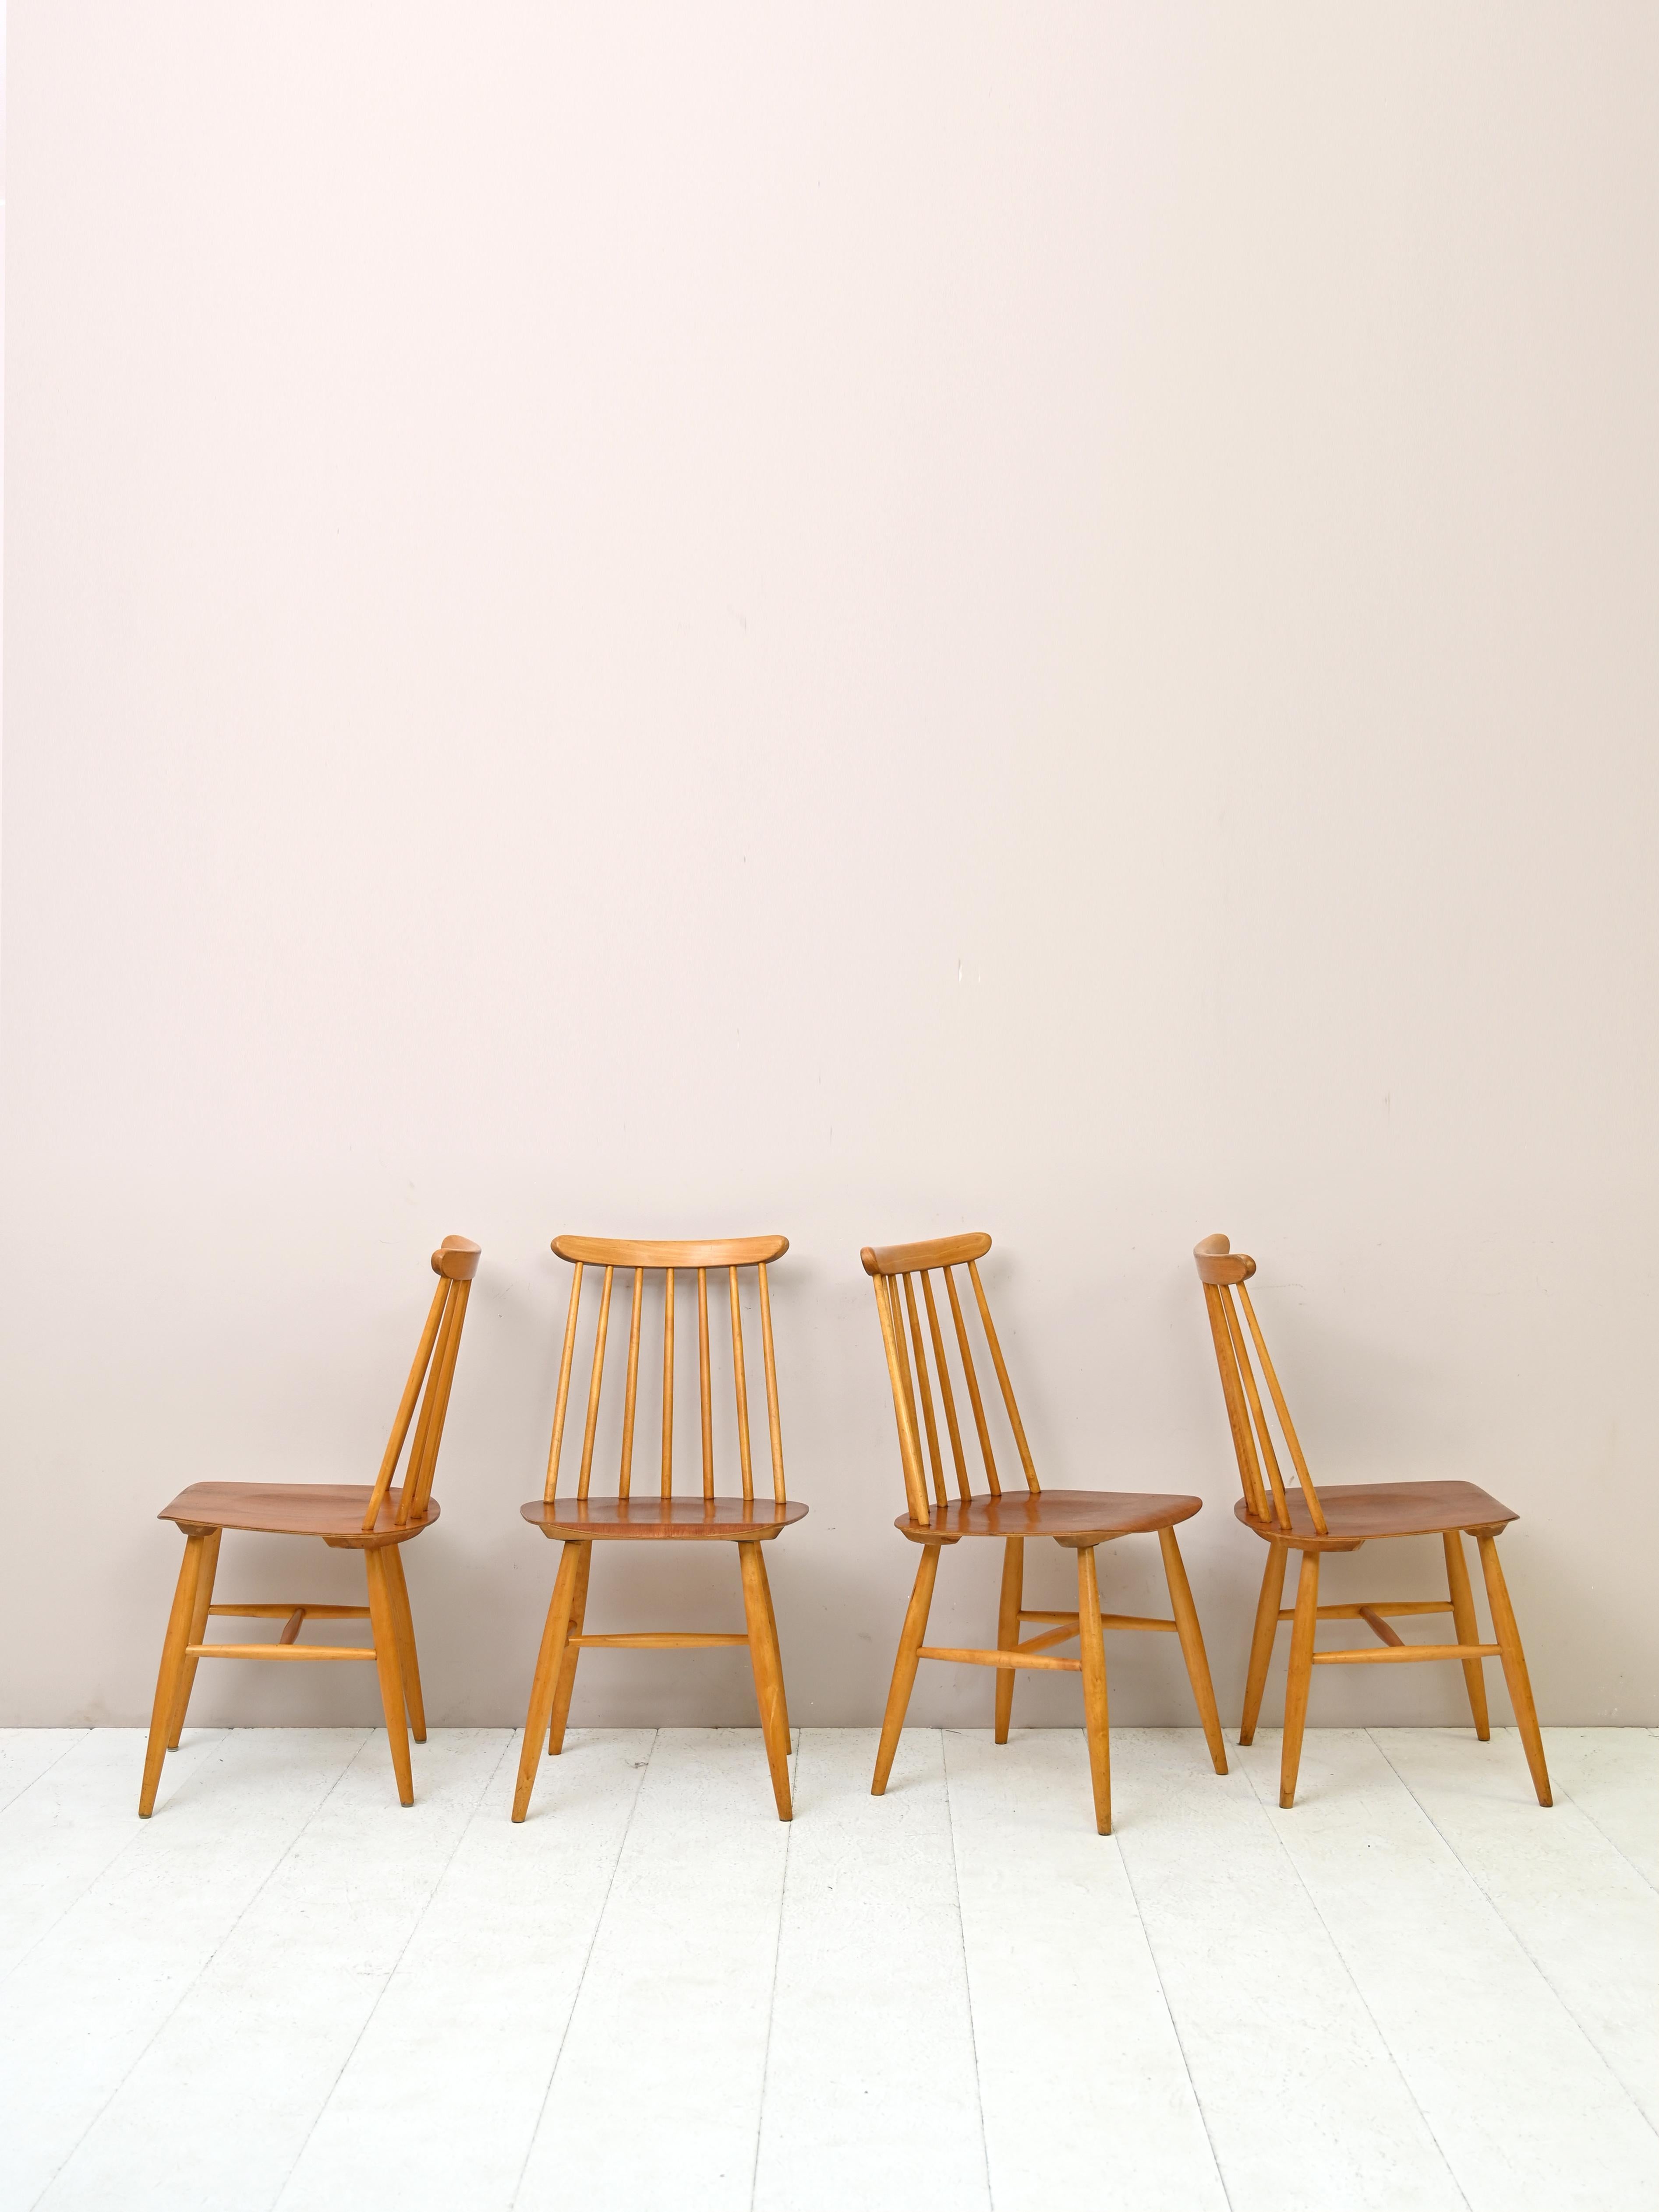 Set of four original vintage wooden chairs from the 1960s.
This chair model that has become iconic is typical of the Scandinavian style. The frame is made of wood from
oak while the contoured seat is made of teak.
These light and modern chairs